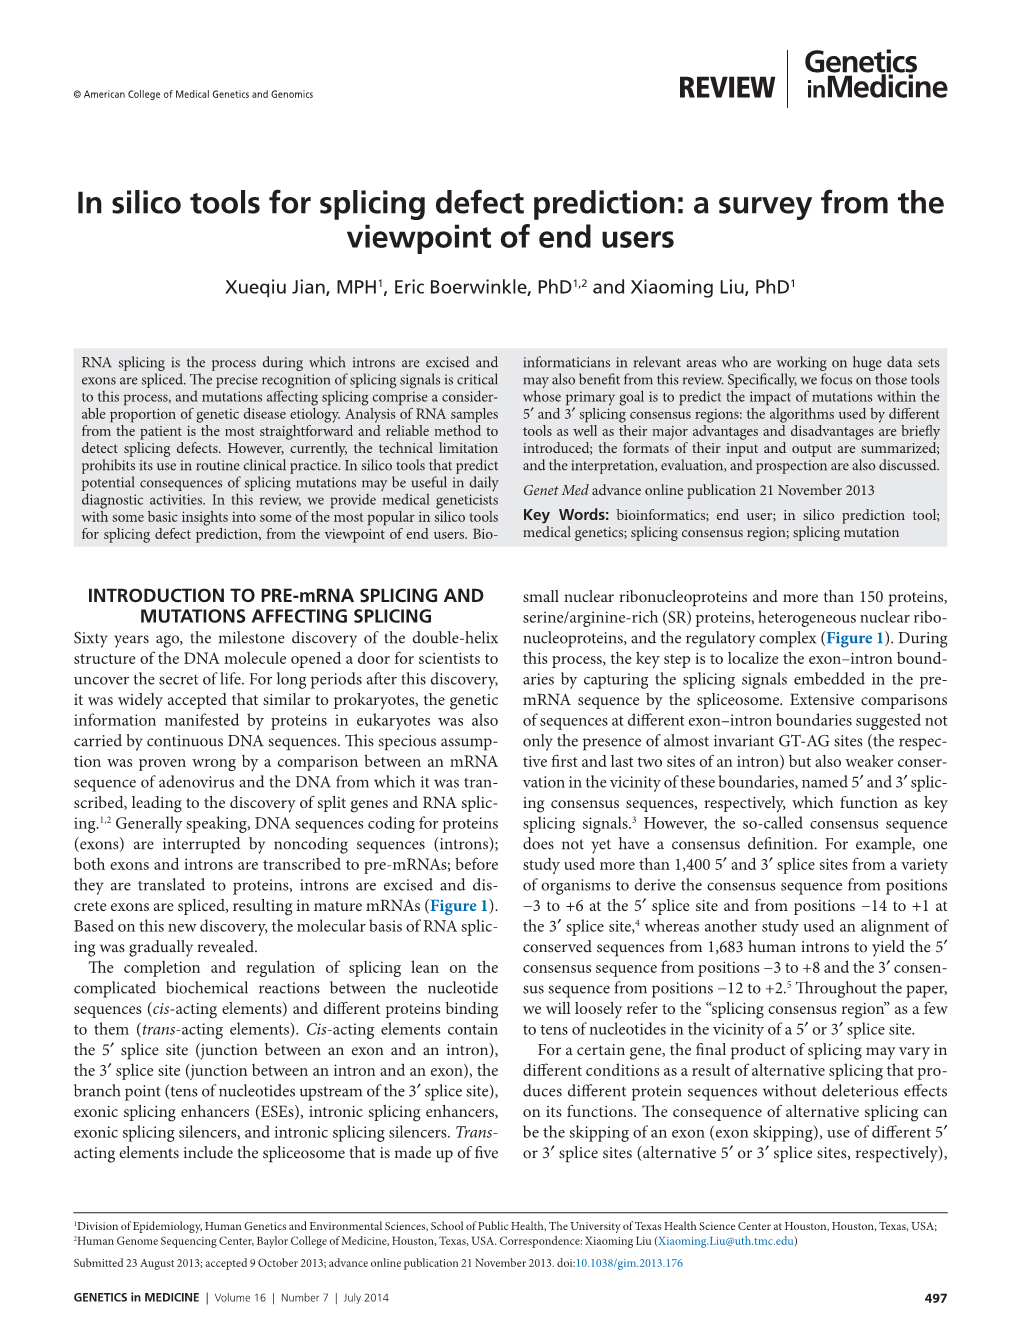 In Silico Tools for Splicing Defect Prediction: a Survey from the Viewpoint of End Users